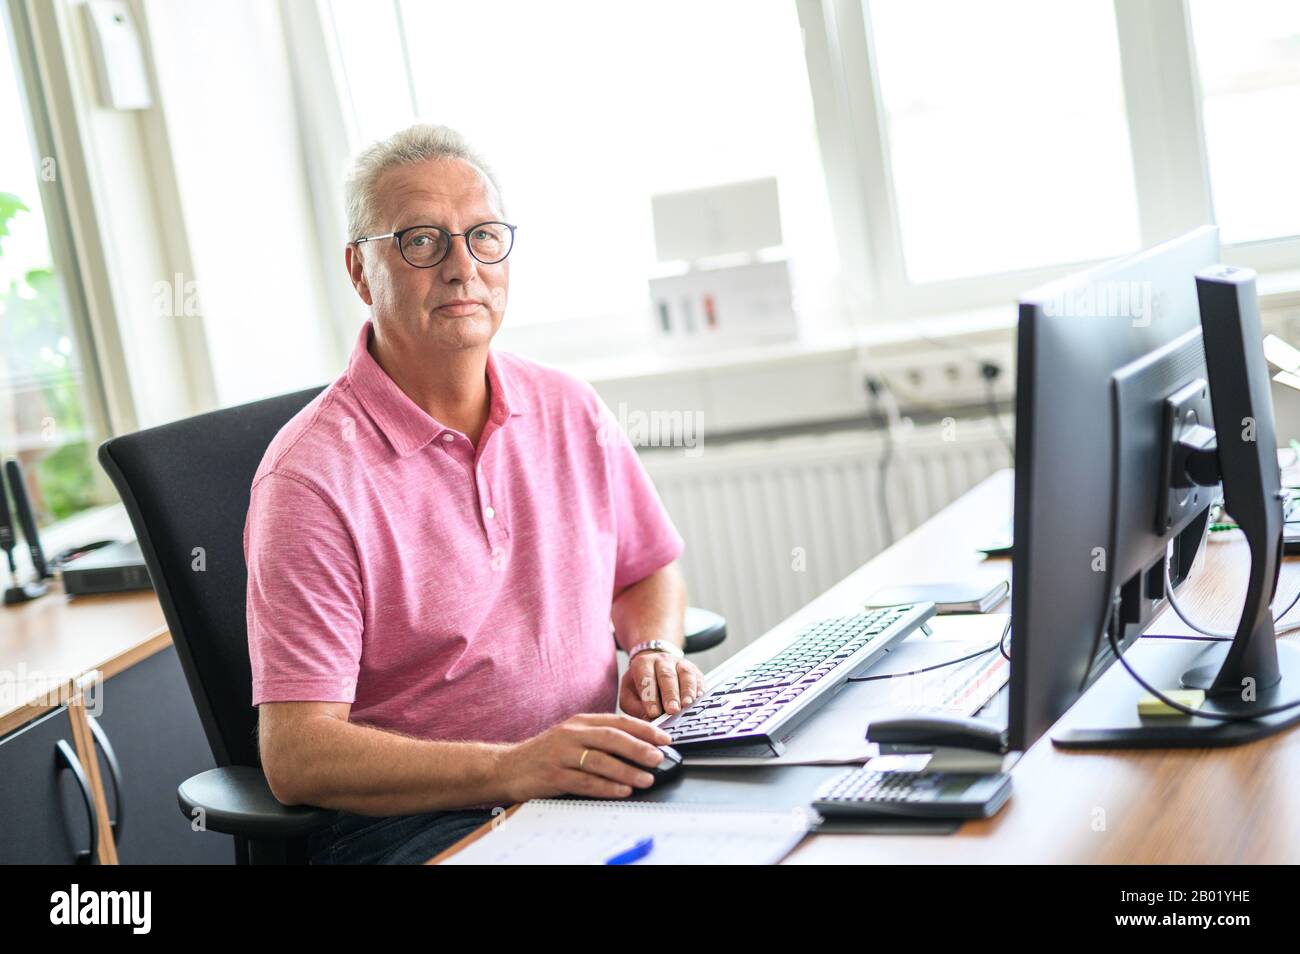 Uwe Richter High Resolution Stock Photography and Images - Alamy